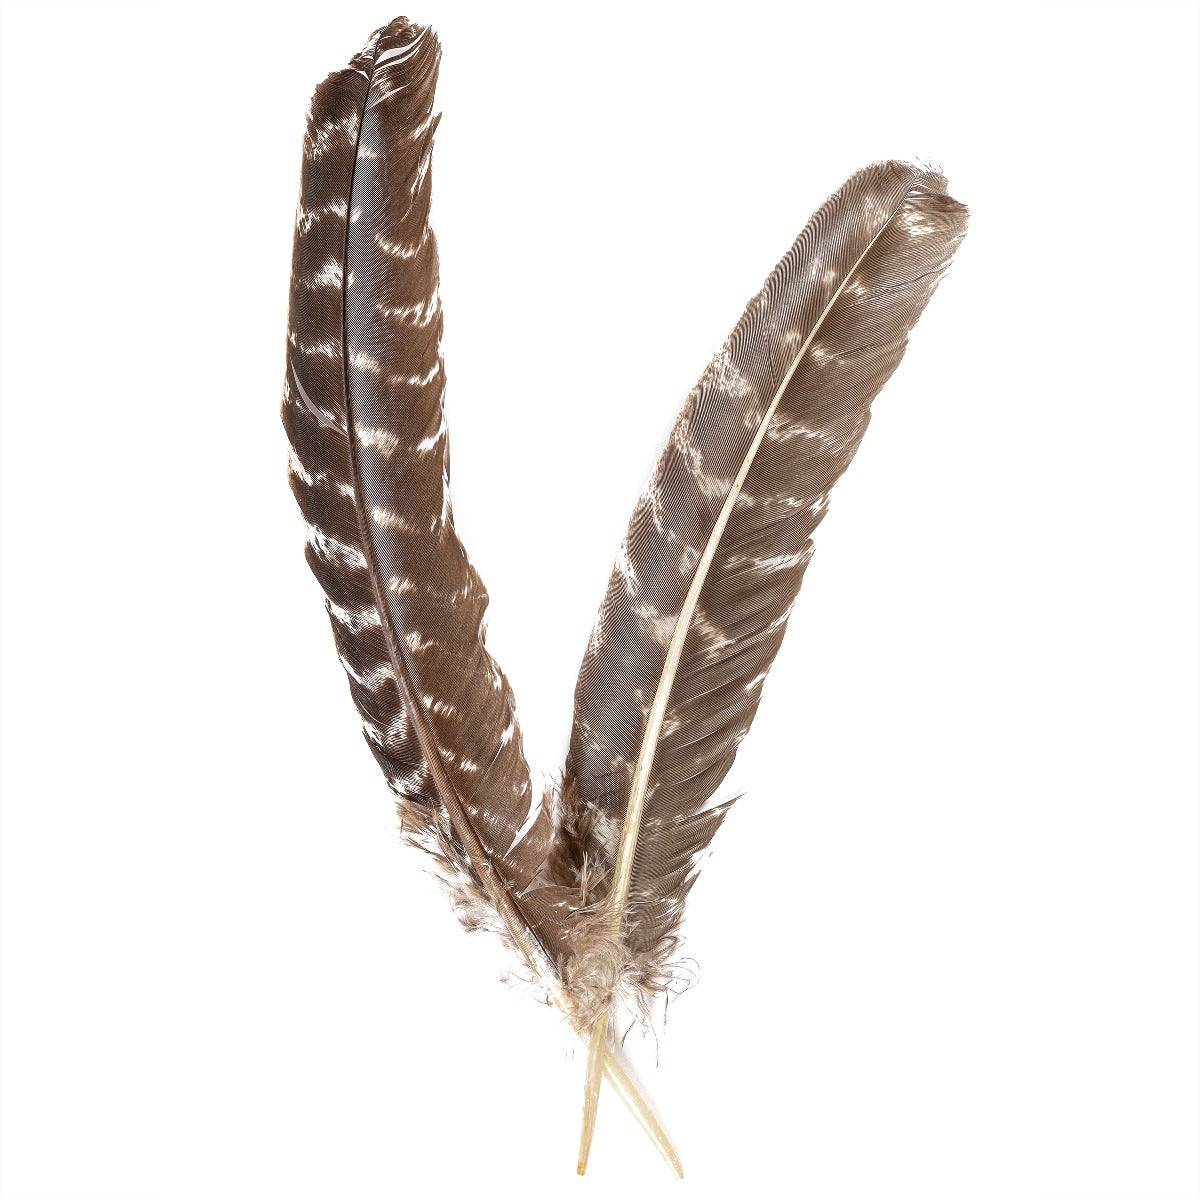  10pcs Wild Turkey Feathers Natural 10-12 inch Spotted